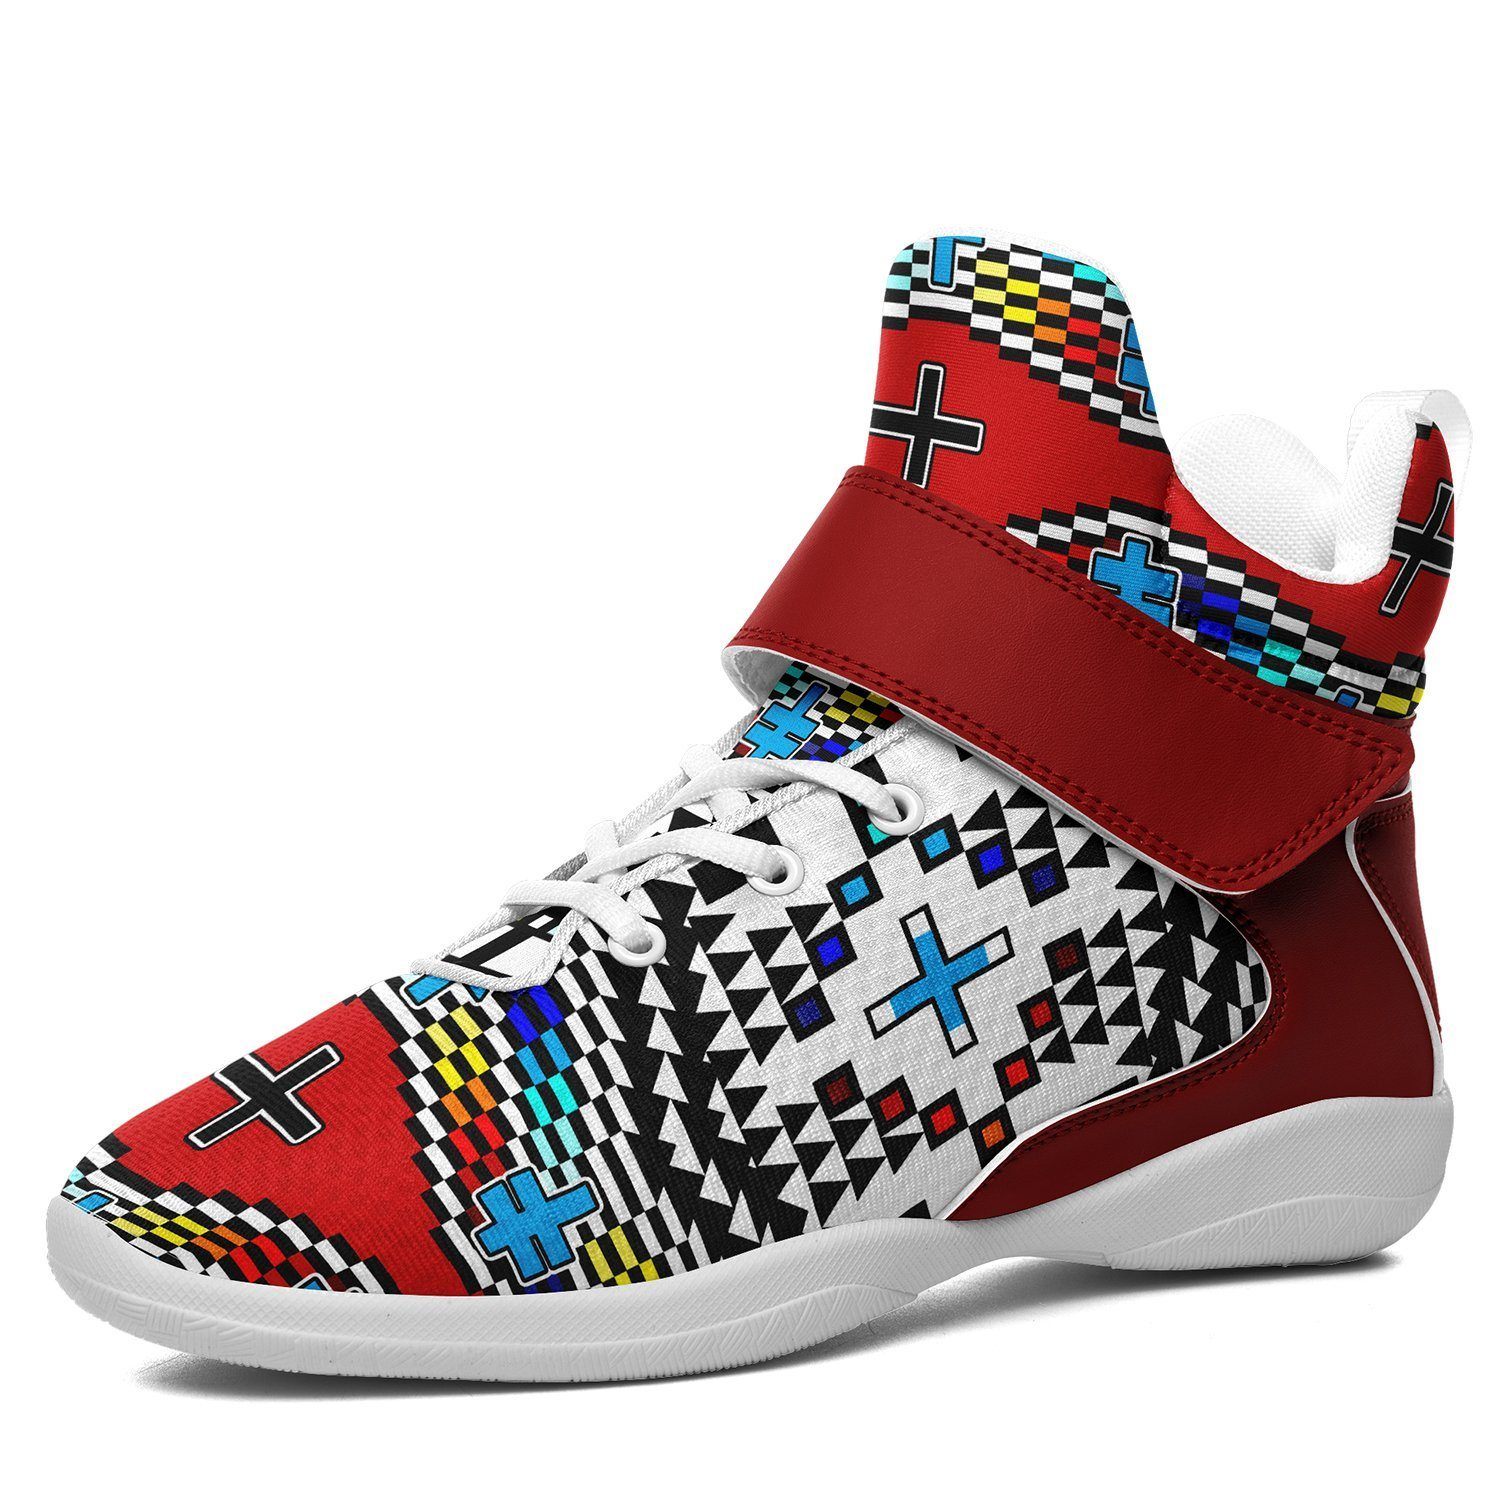 Dragonflies Ipottaa Basketball / Sport High Top Shoes - White Sole 49 Dzine US Men 7 / EUR 40 White Sole with Dark Red Strap 